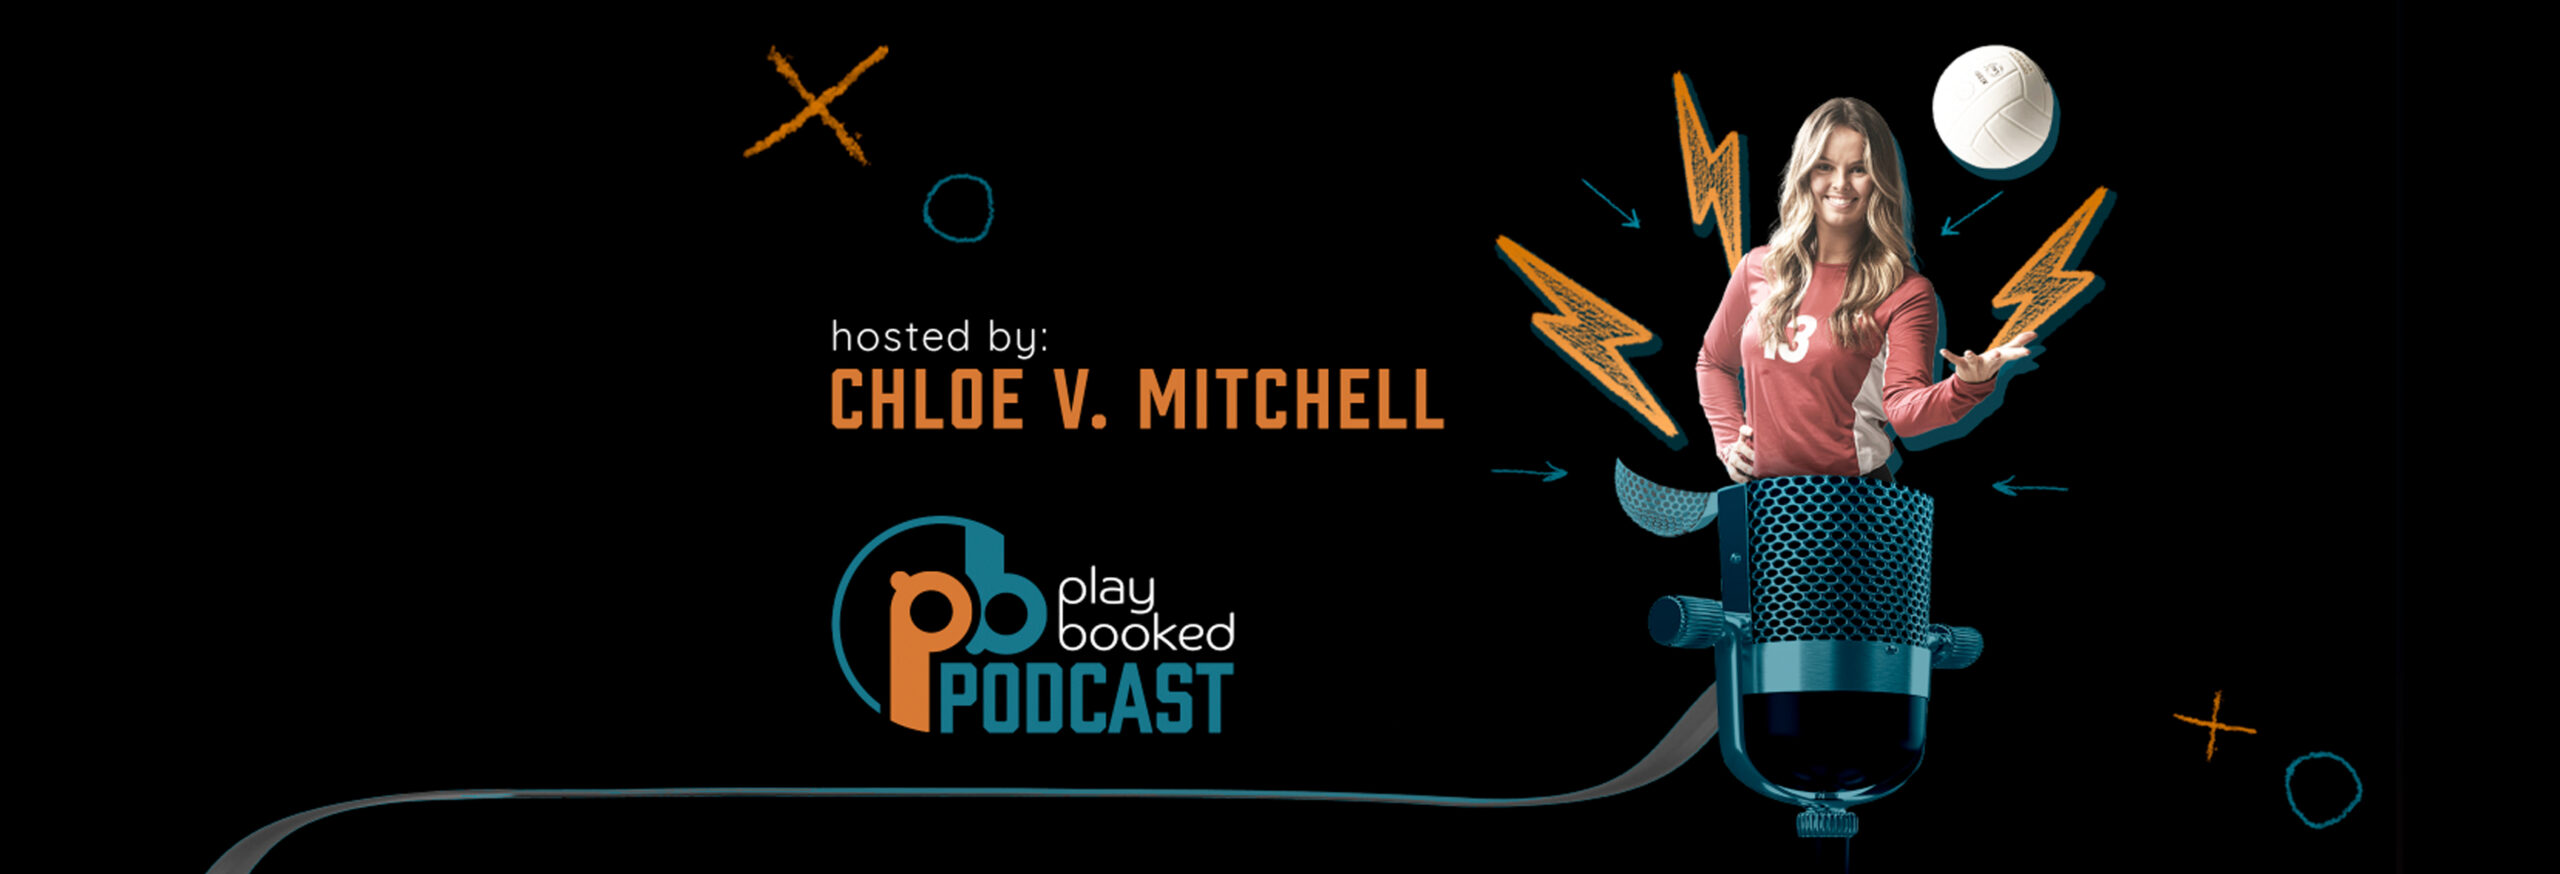 PlayBooked Podcast